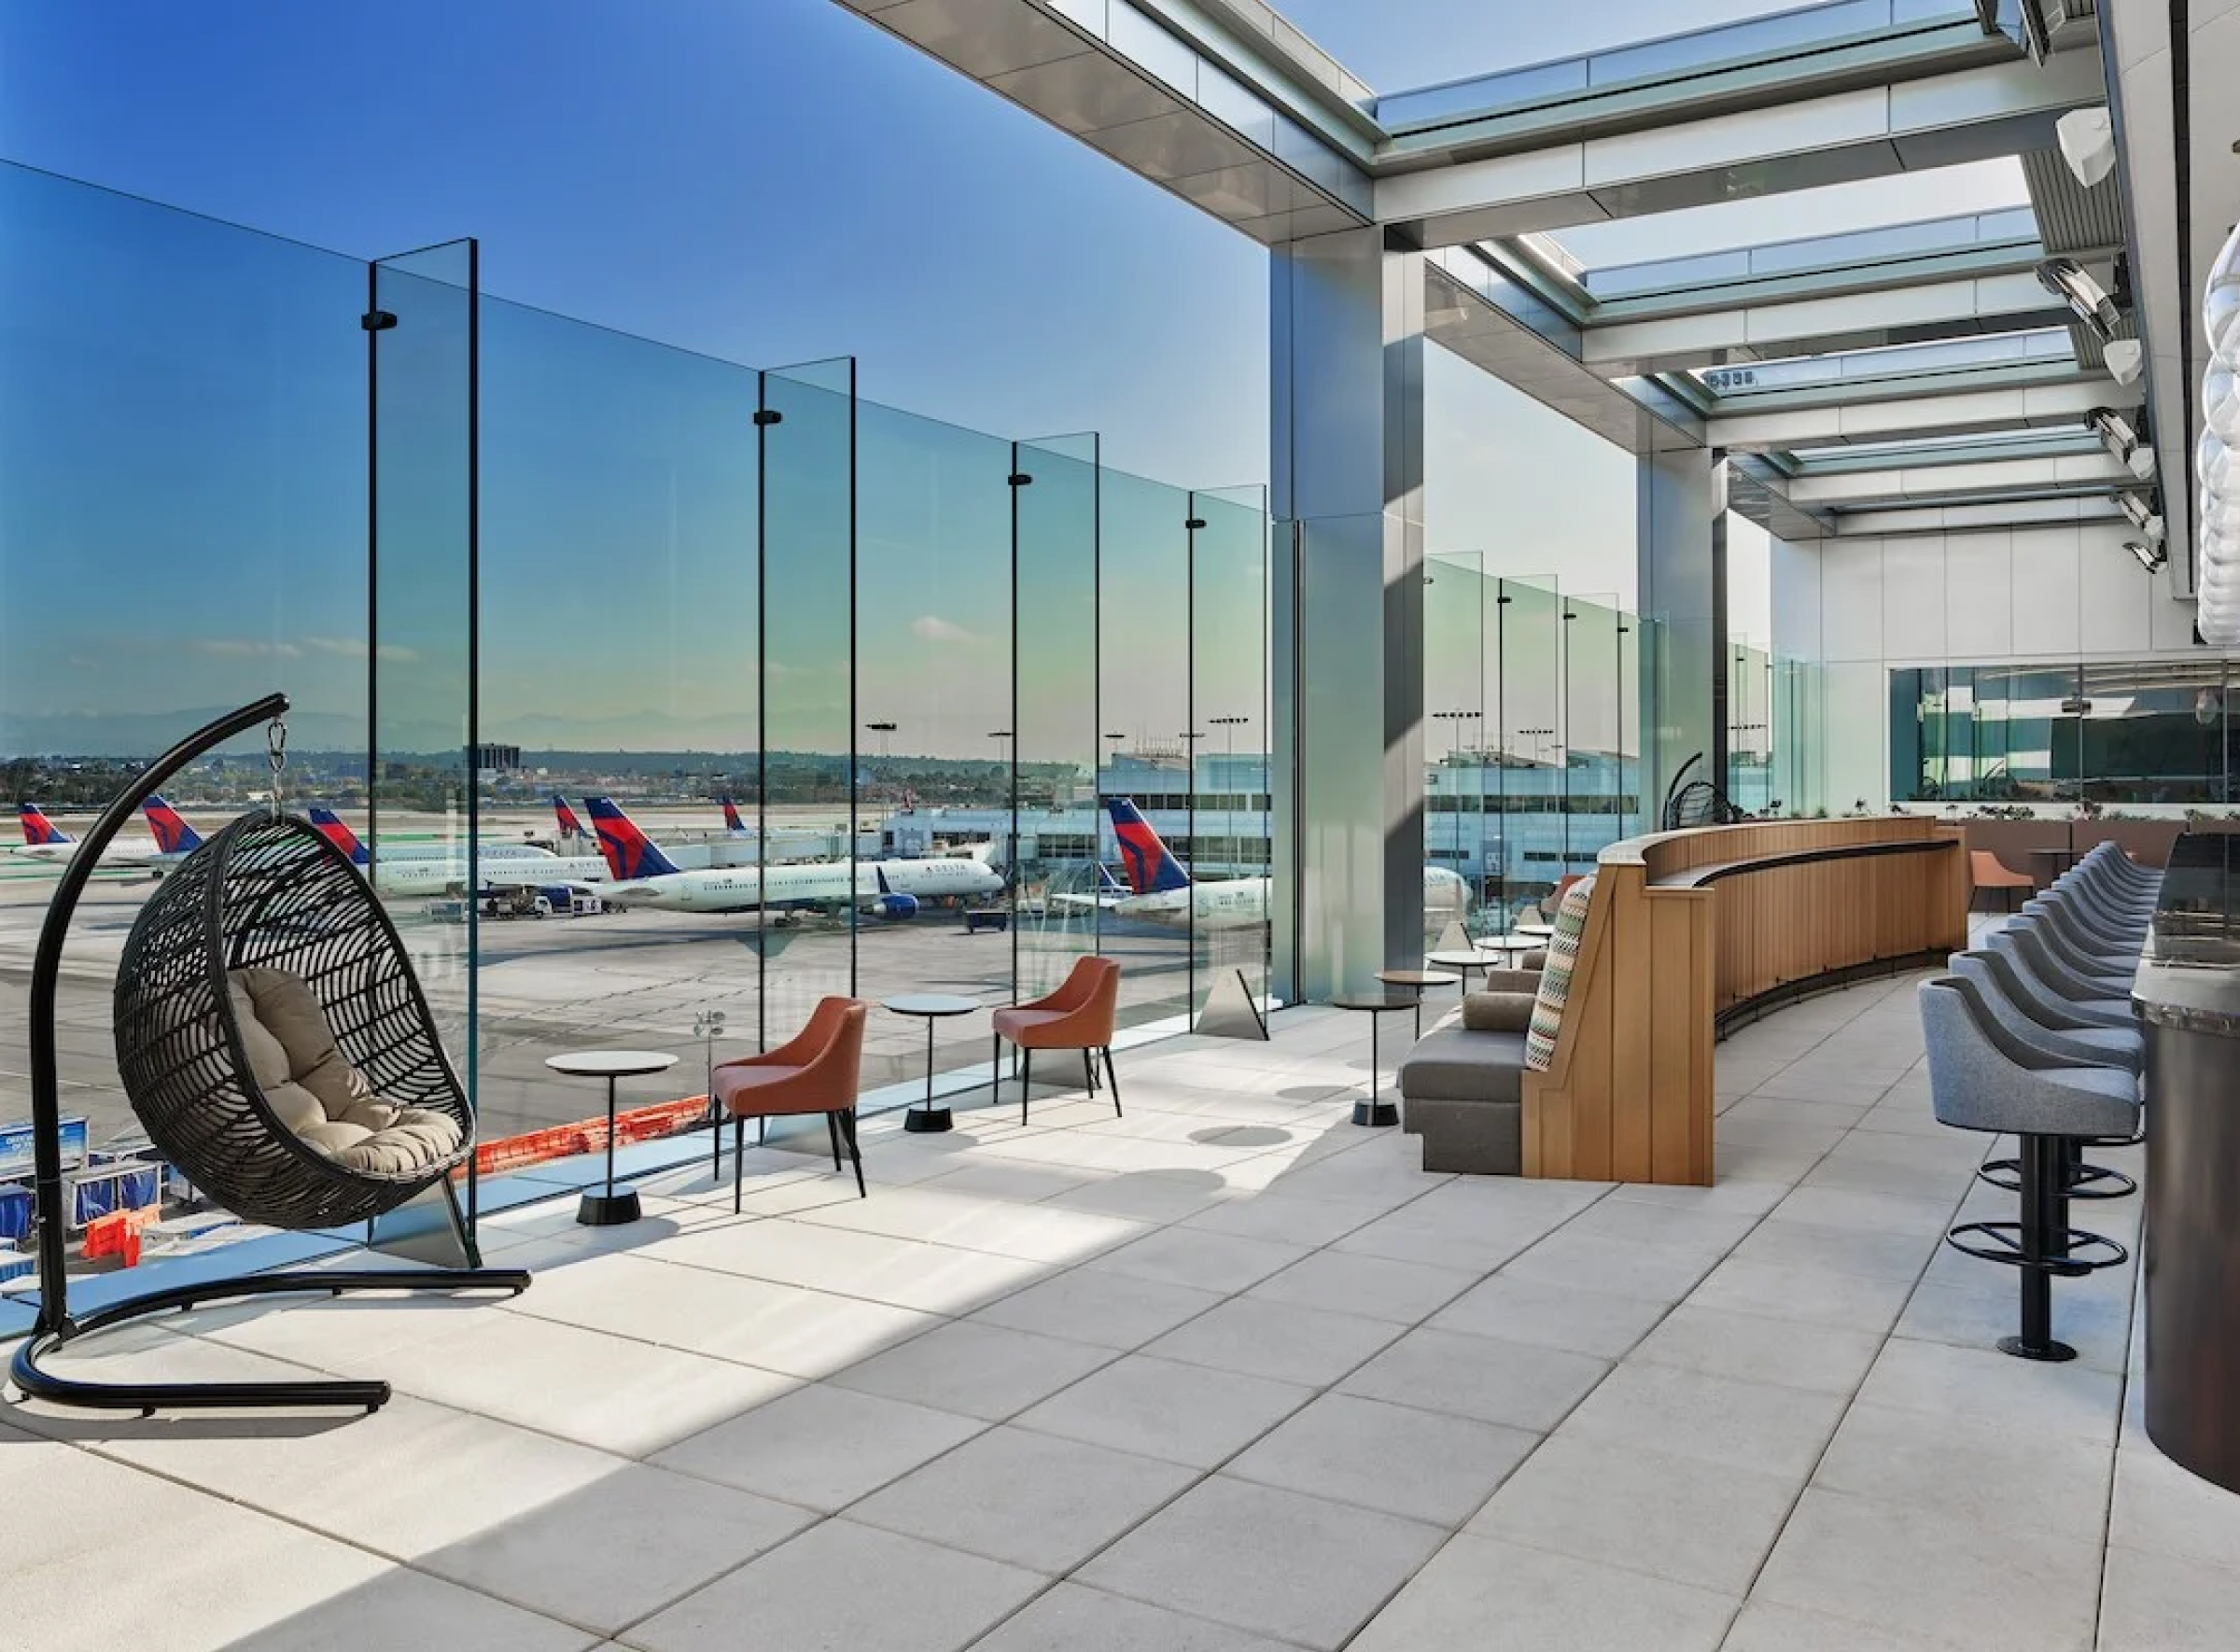 Star Alliance’s LAX Lounge Wins Fifth Consecutive North America’s Leading Airport Lounge Award